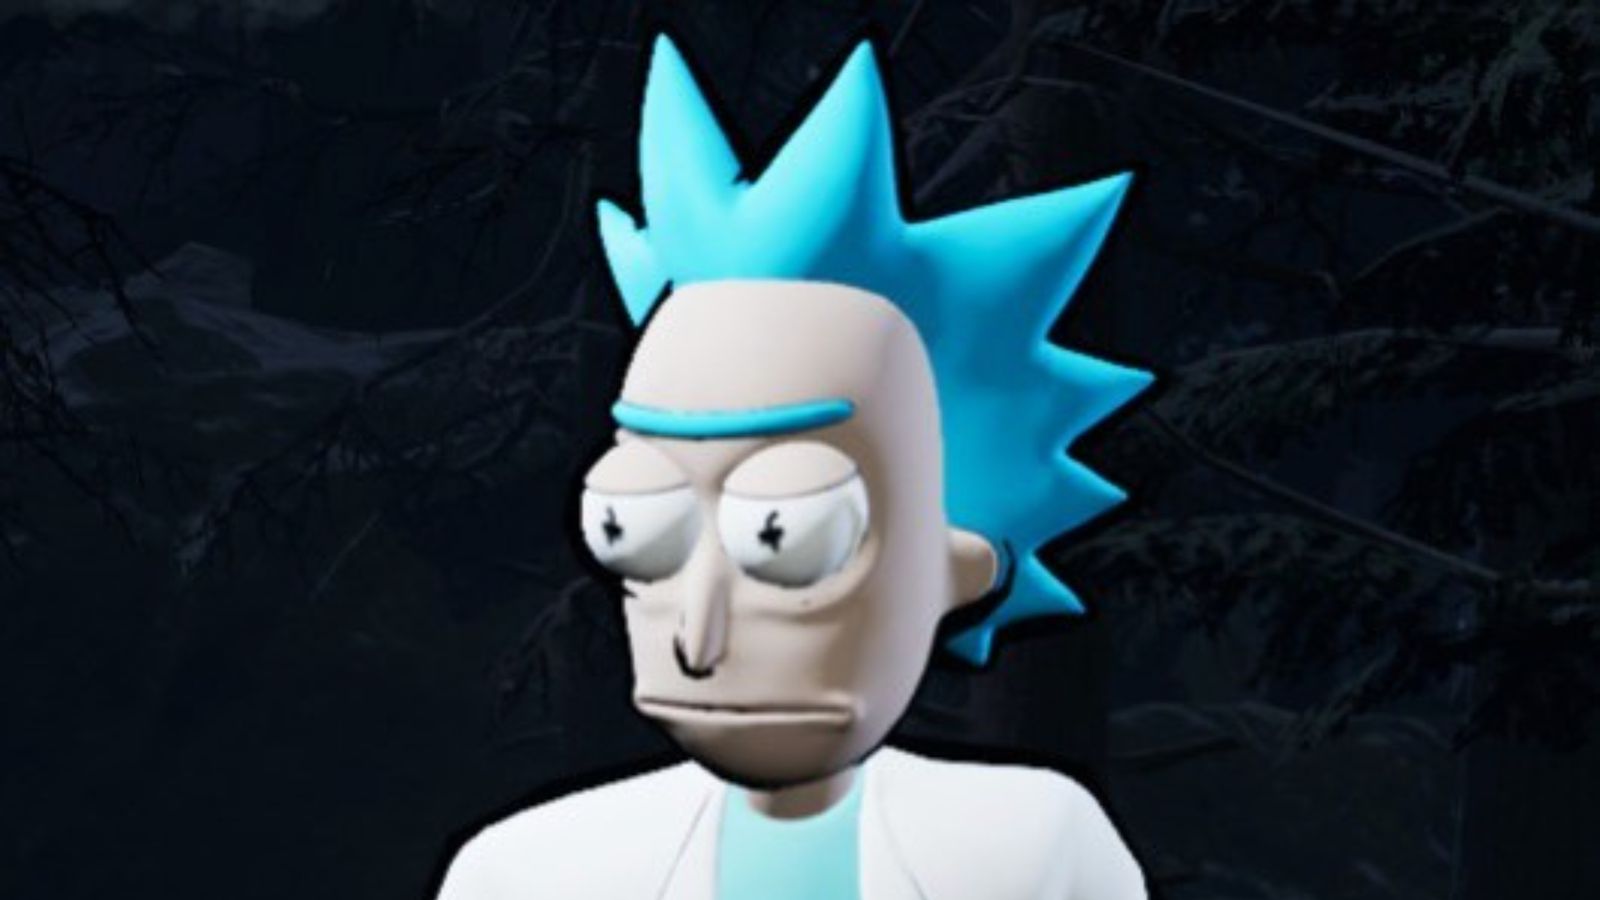 Rick-and-Morty-mod-for-dead-by-daylight